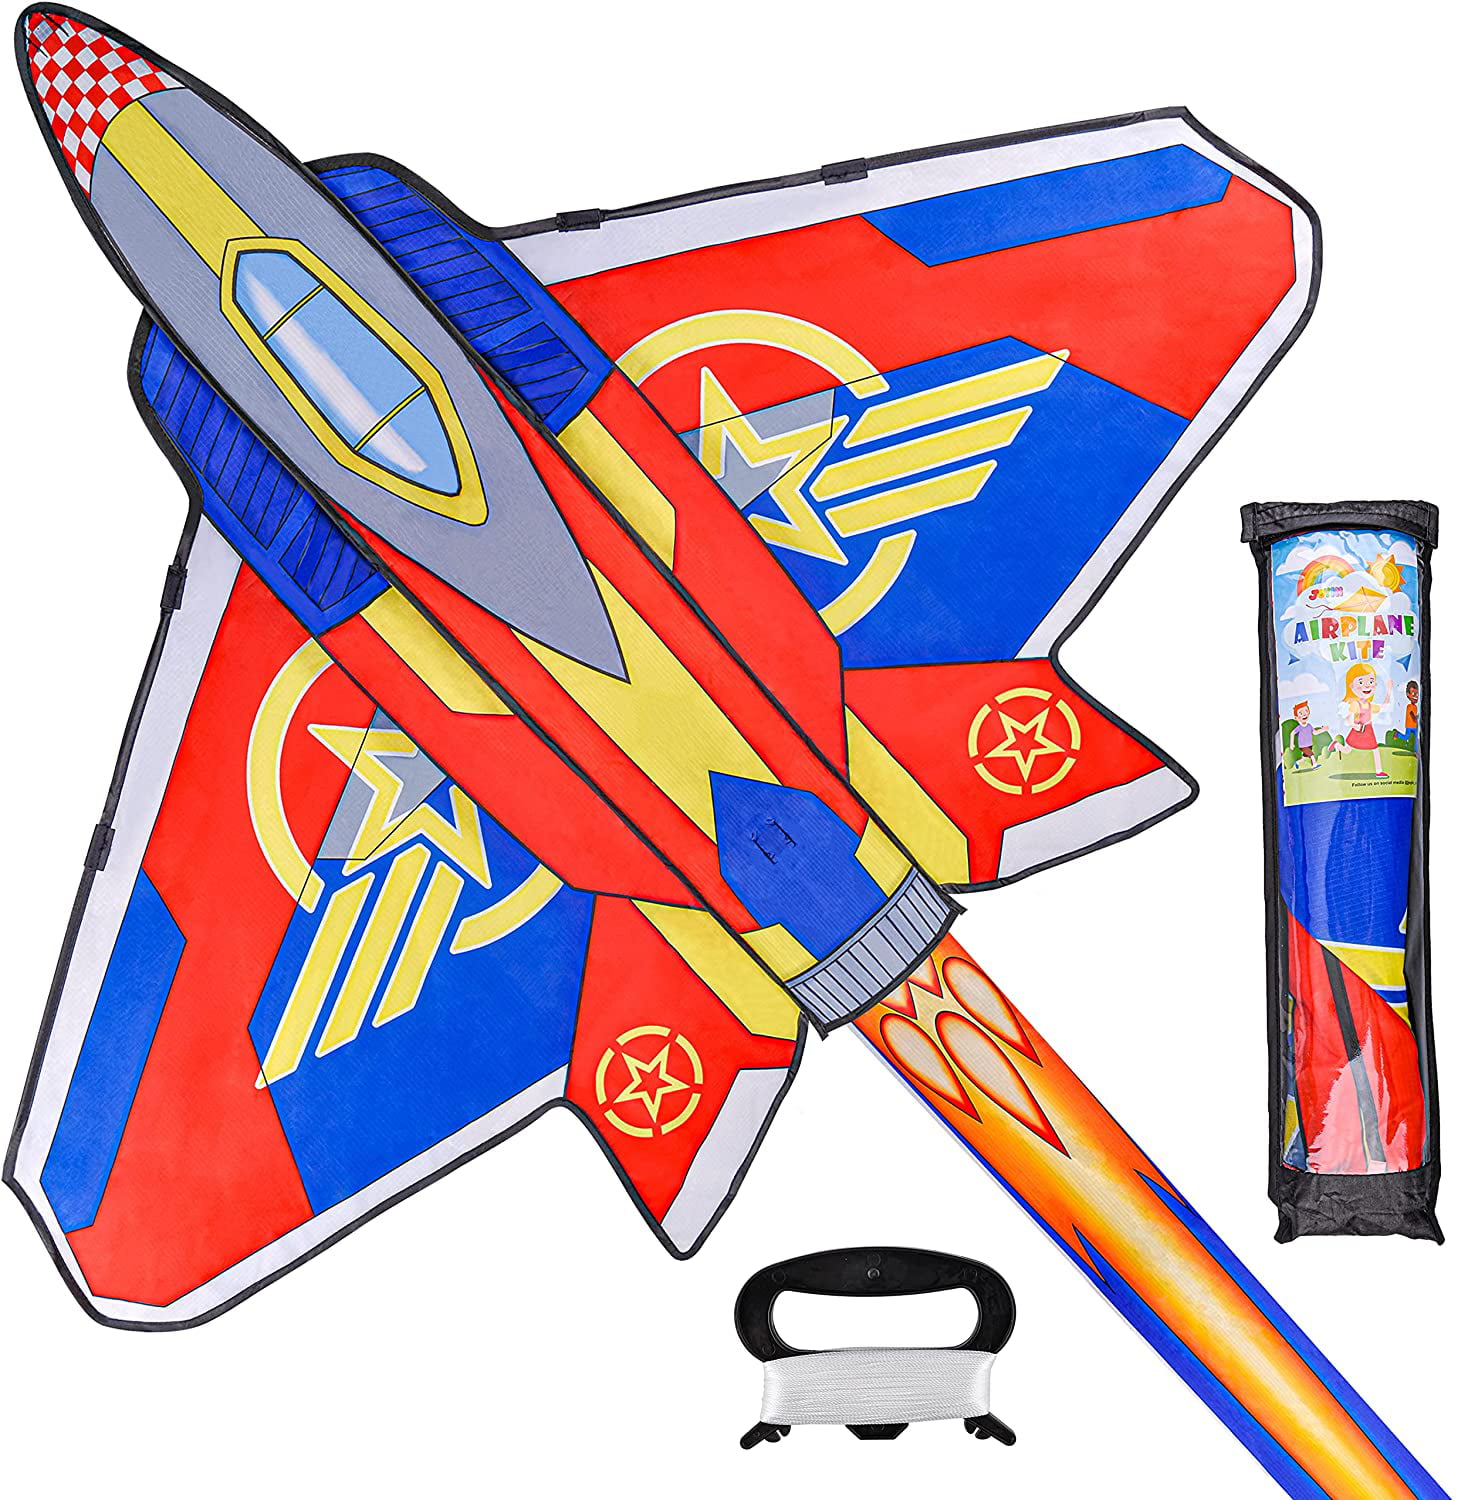 Color : Red TX GIRL Power Maple Leaf Red Kite with Handle and Line Good Flying Outdoor Fun Sports